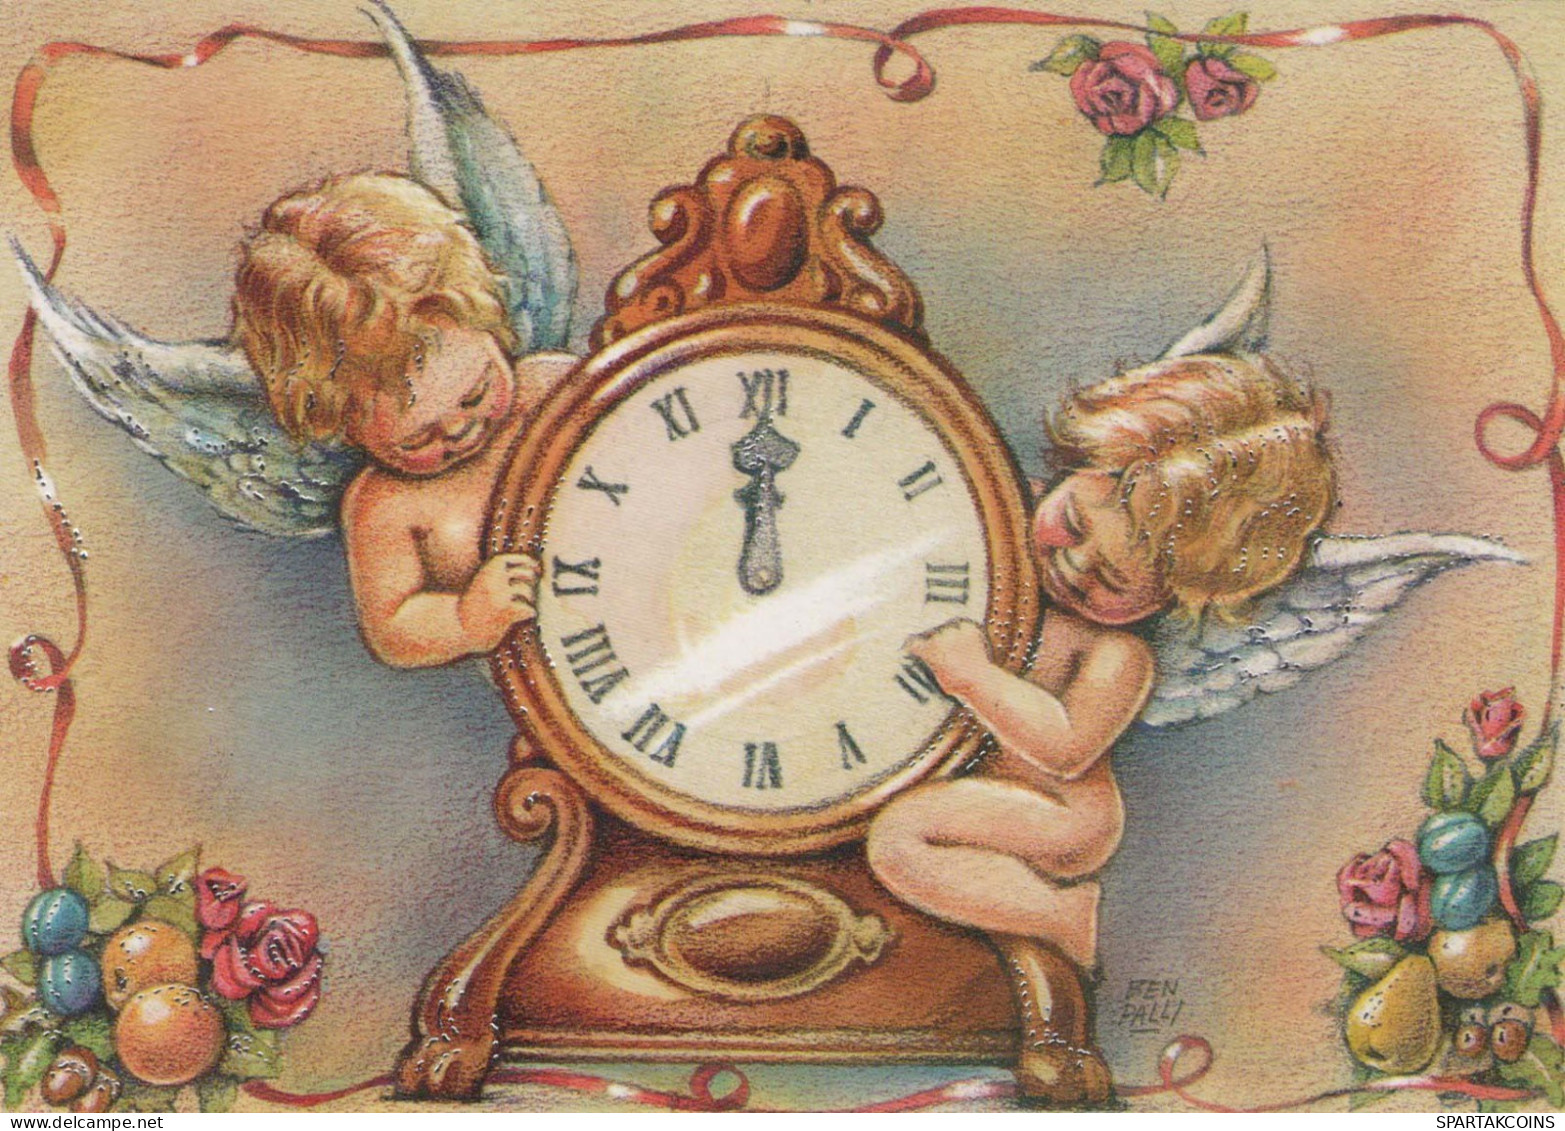 ANGEL Happy New Year Christmas TABLE CLOCK Vintage Postcard CPSM #PAT870.GB - Angels